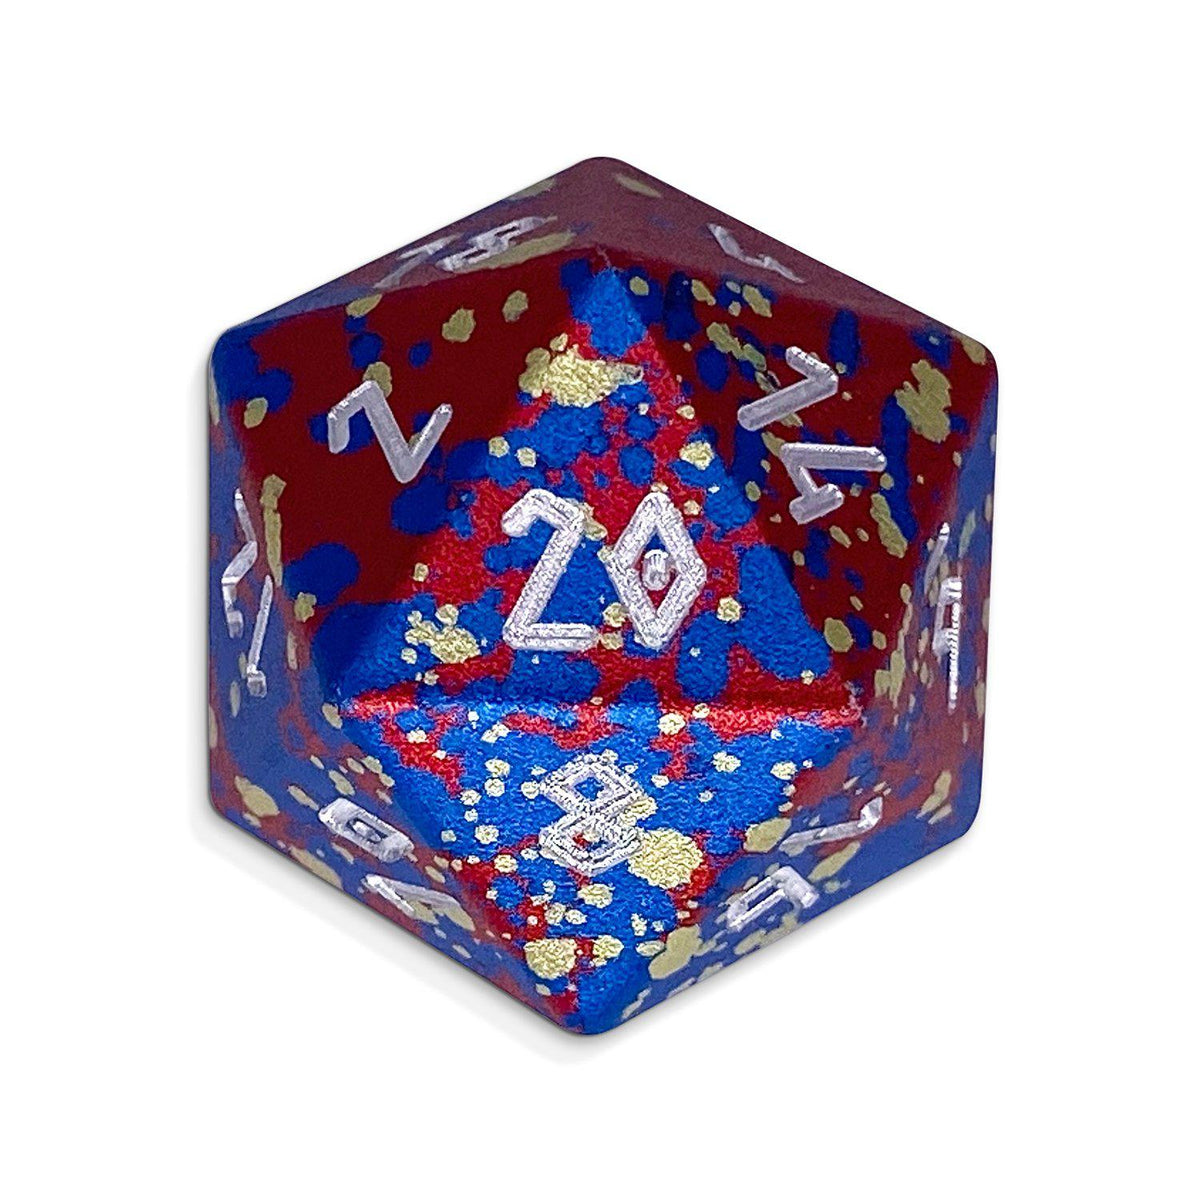 Single Wondrous Dice® D20 in Barbarians Rage by Norse Foundry - NOR 02392